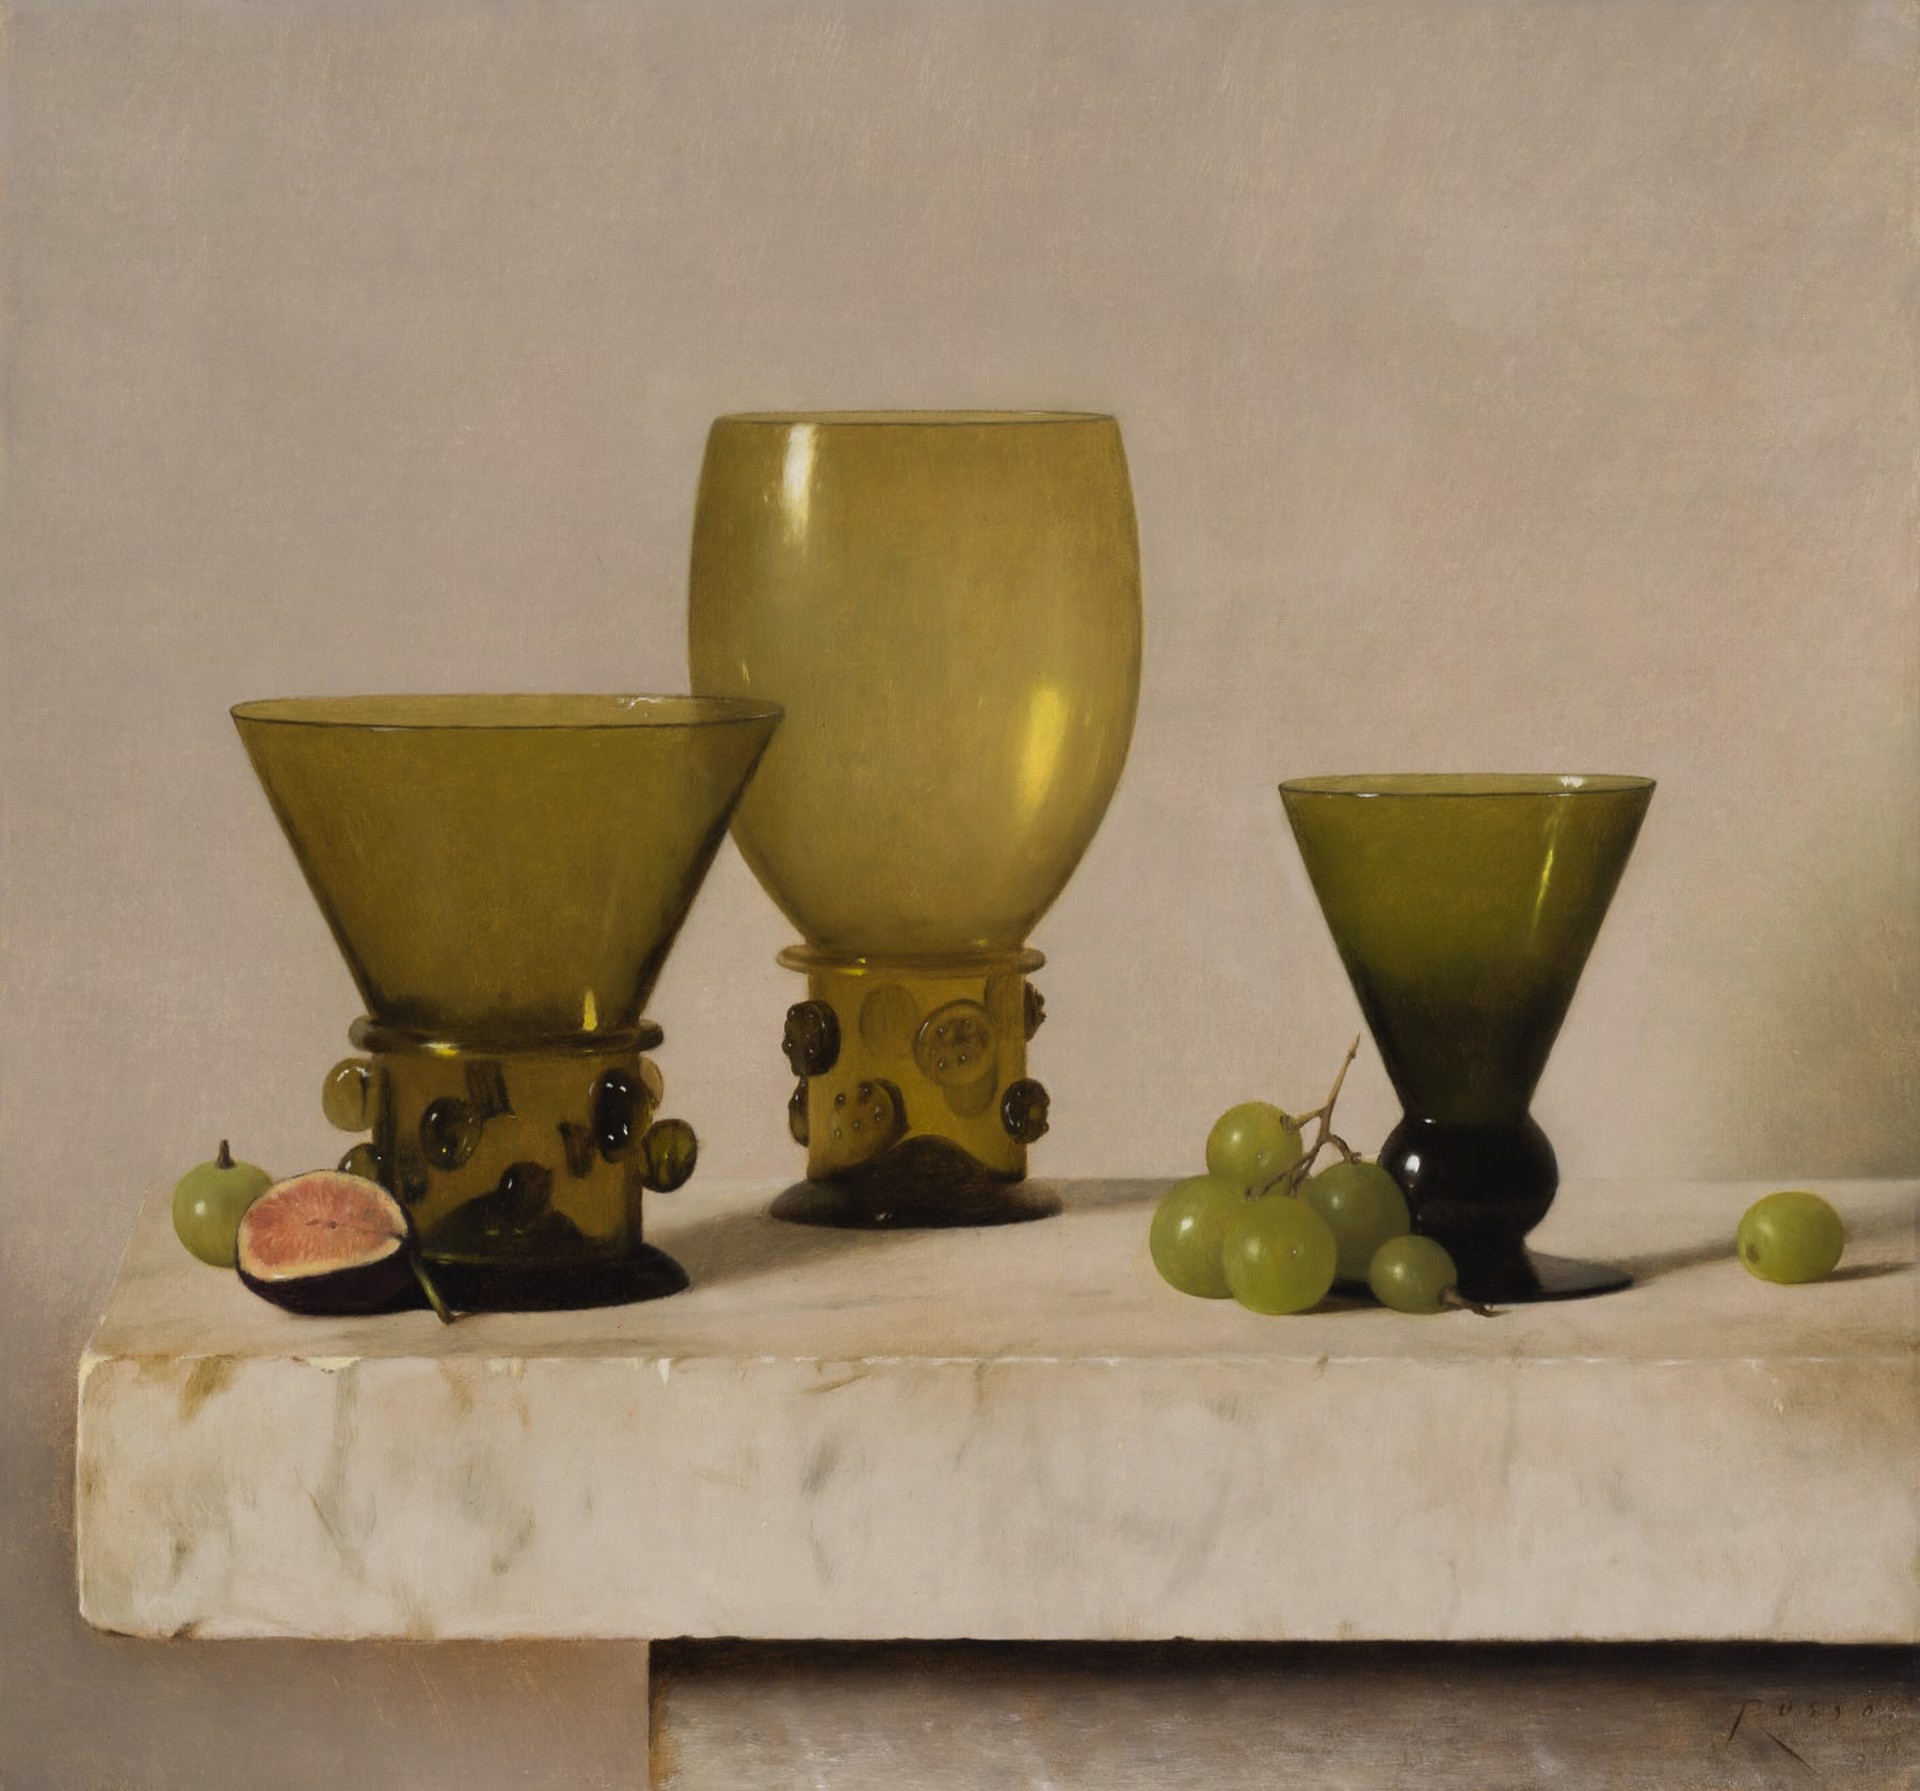 Three Amber Glasses by Carlo Russo